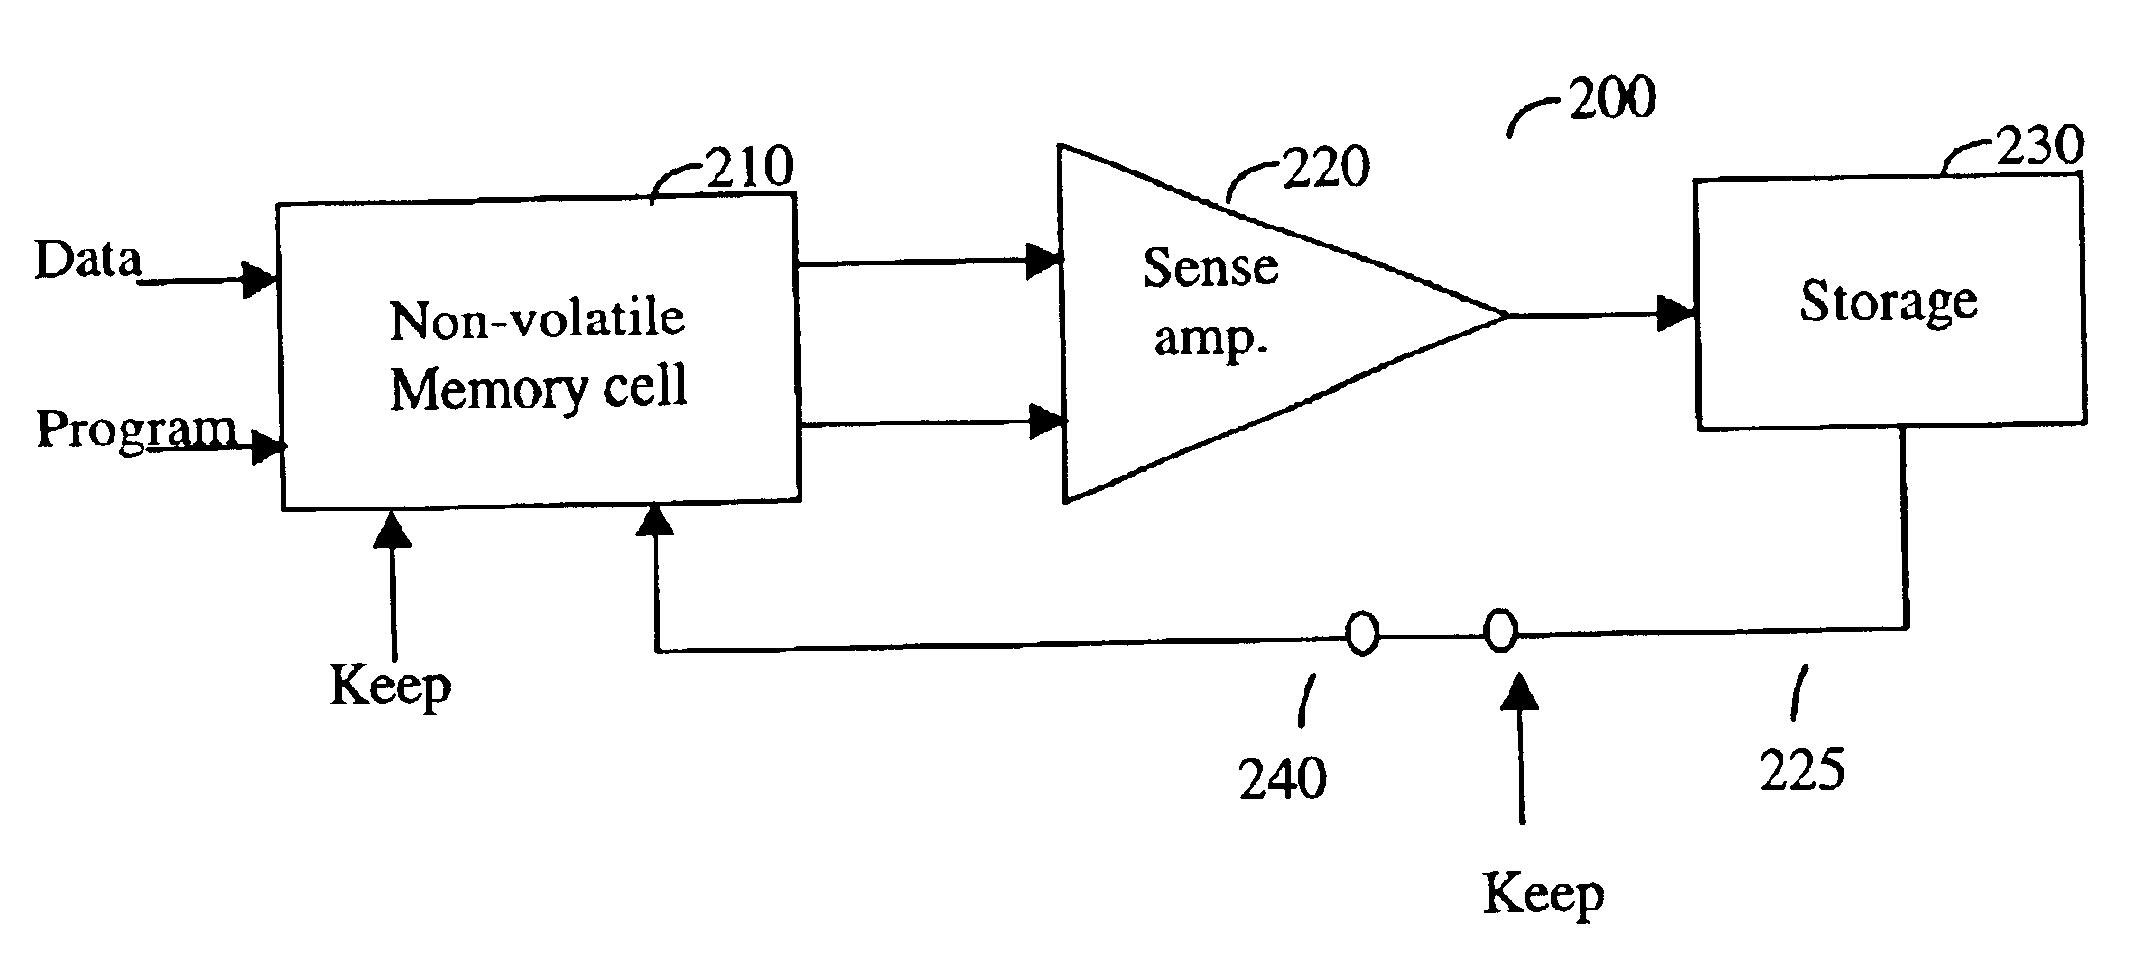 Methods and apparatuses for maintaining information stored in a non-volatile memory cell